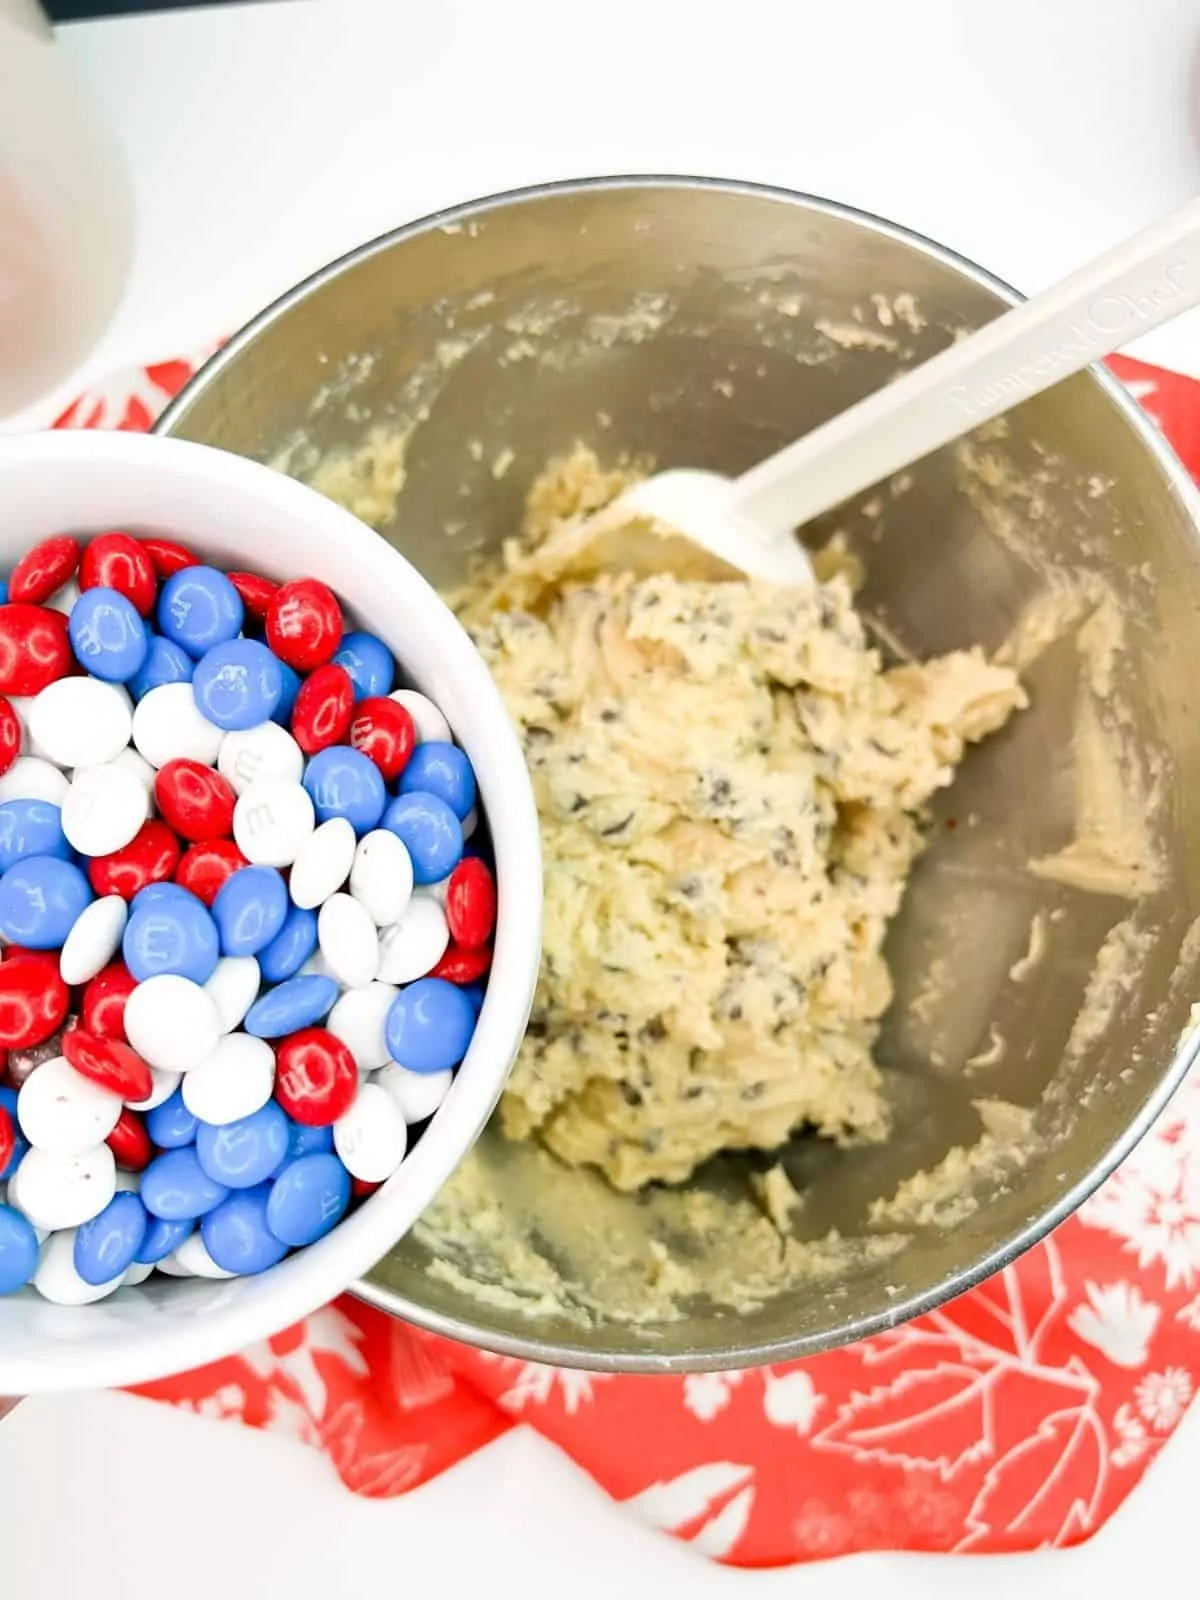 Adding red, white and blue m&ms to cookie dough.